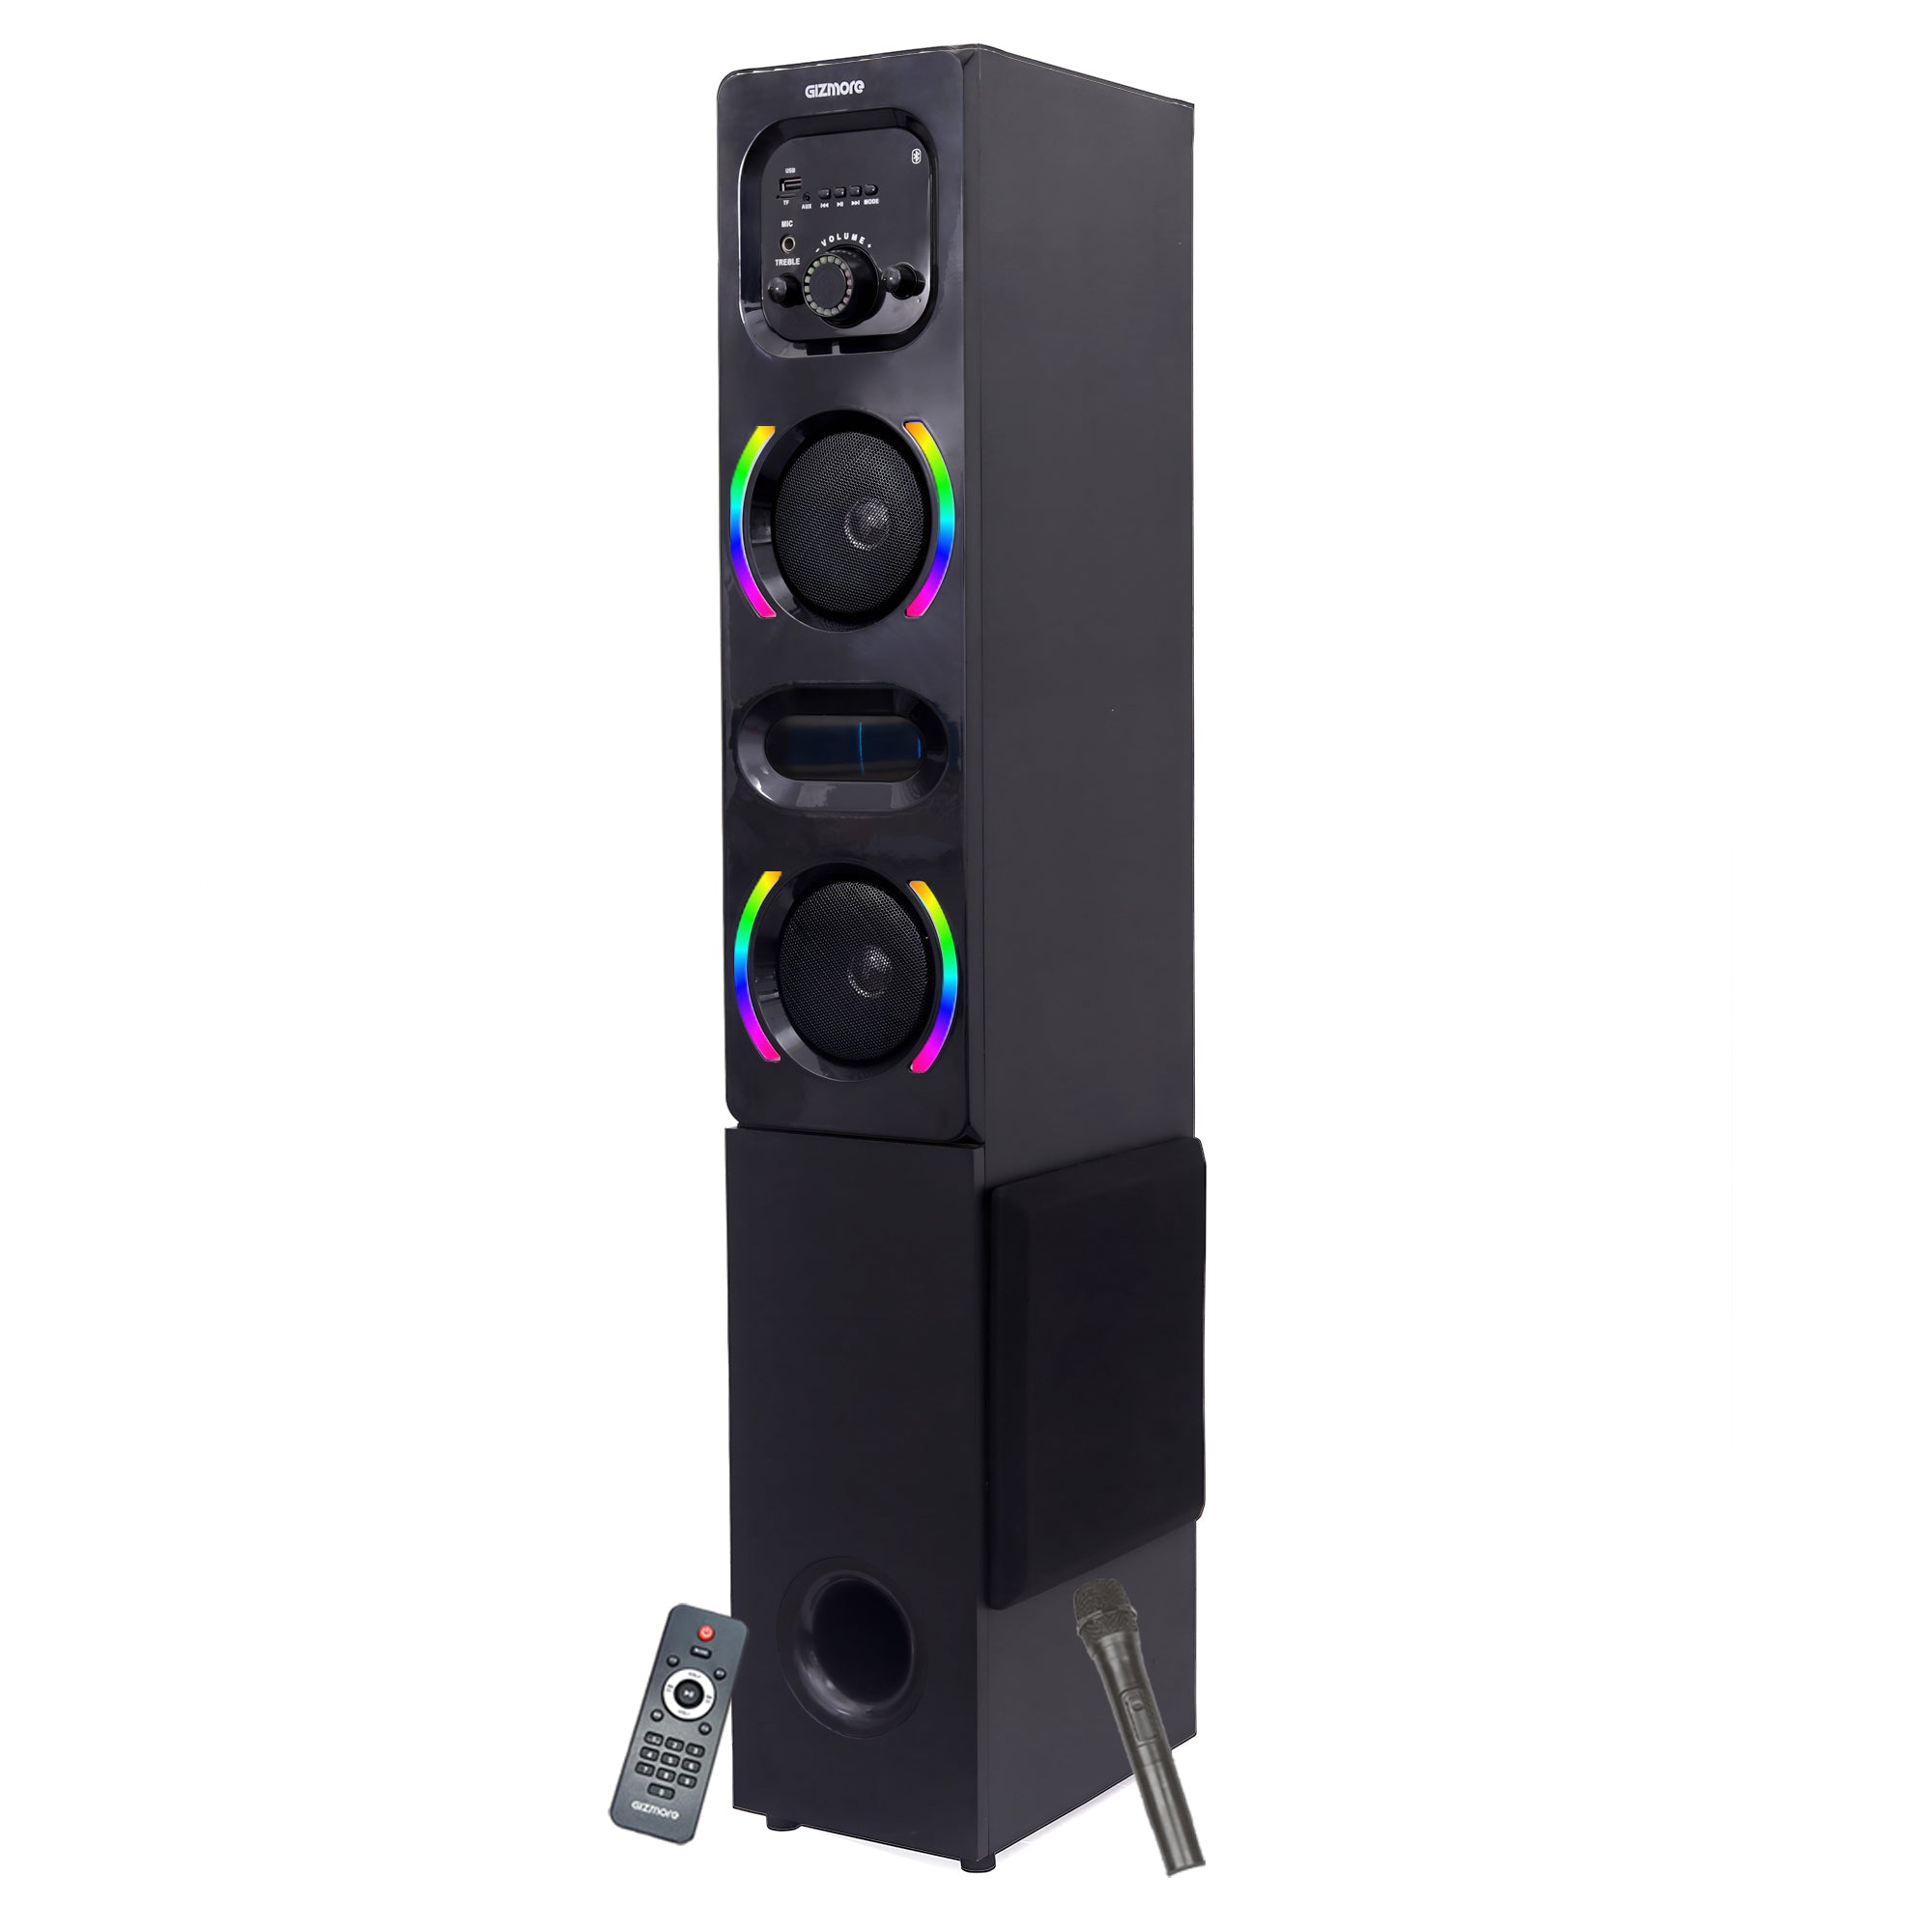 GIZMORE ST9000 100W DJ Tower Speaker | Digital LED Display & RGB Lights | Wireless MIC | Volume & Bass Control | Karaoke and Party Speaker with Multiple Connectivity